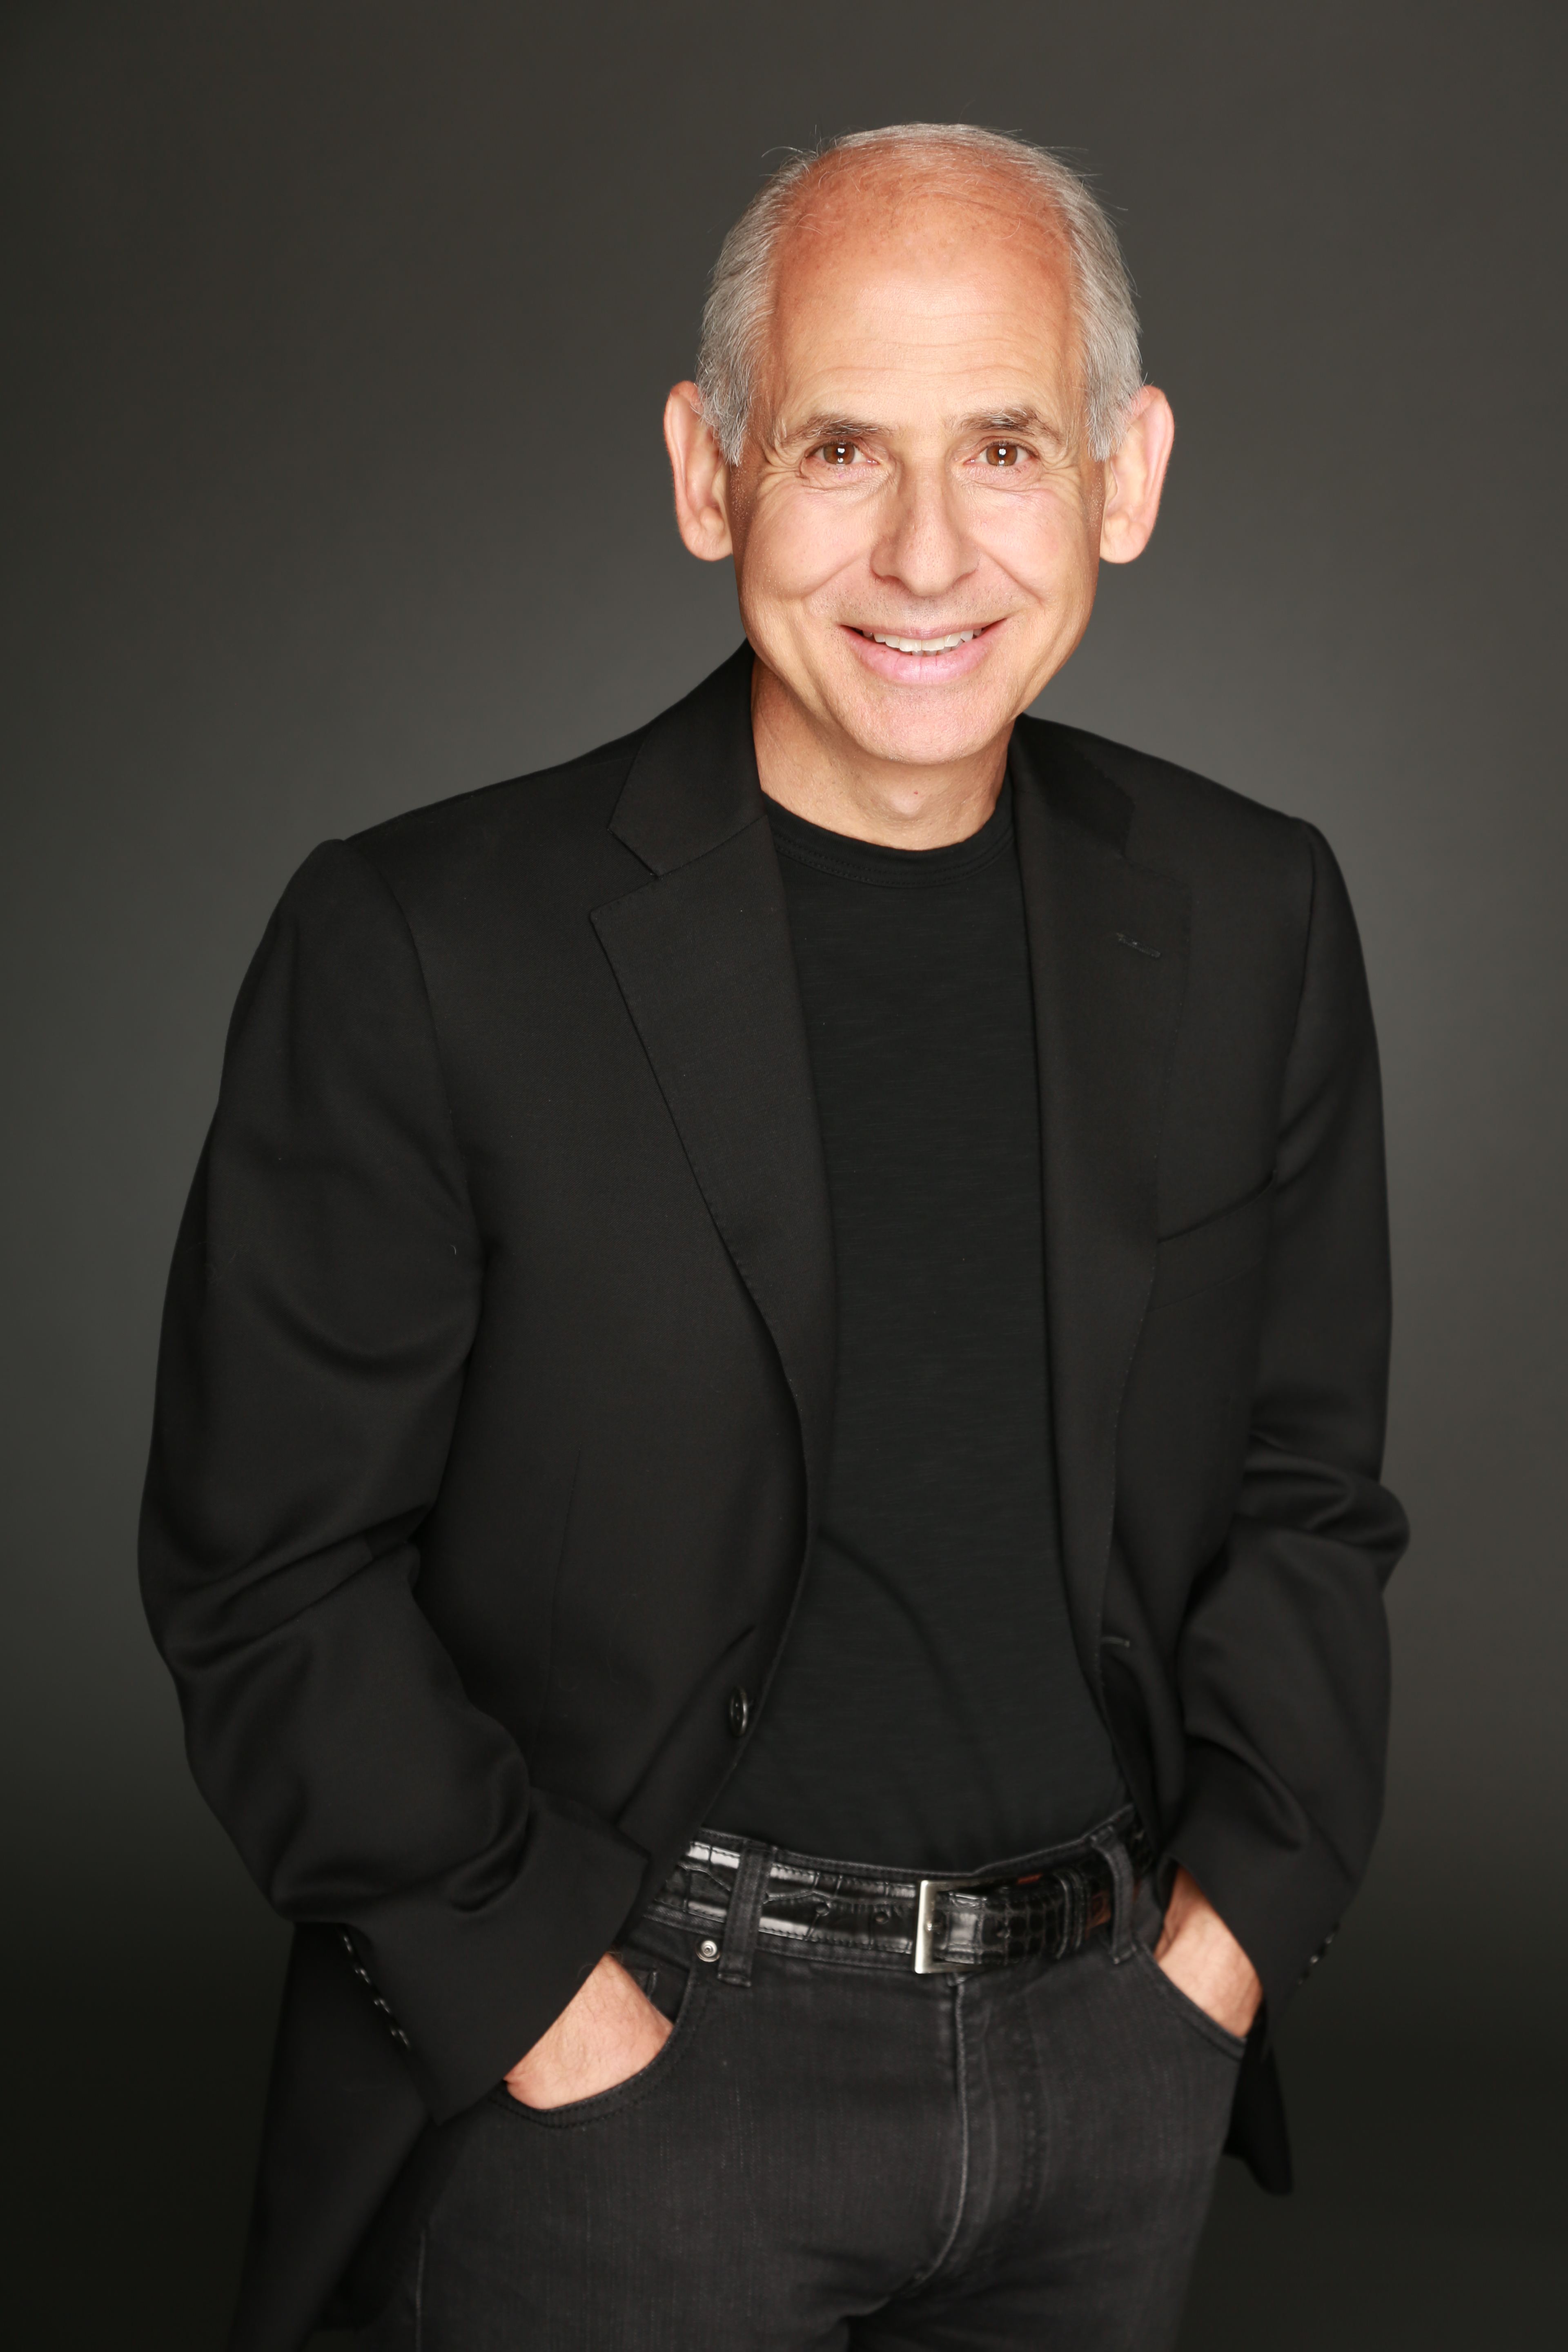 Dr. Daniel Amen as featured on the Jesus Calling podcast